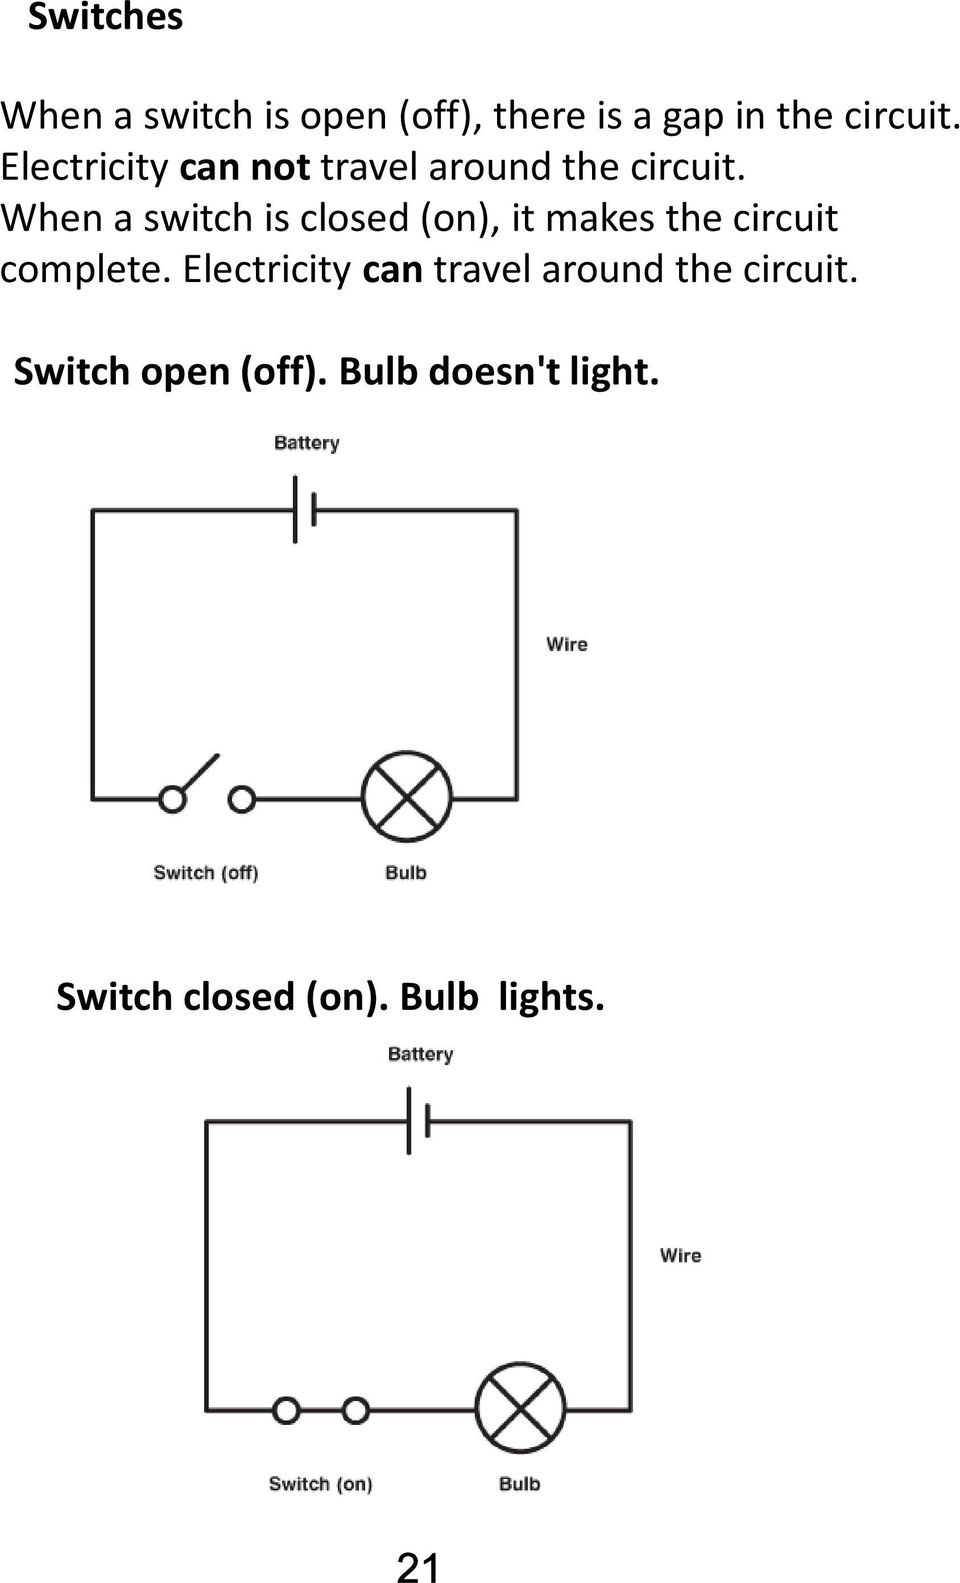 When a switch is closed (on), it makes the circuit complete.